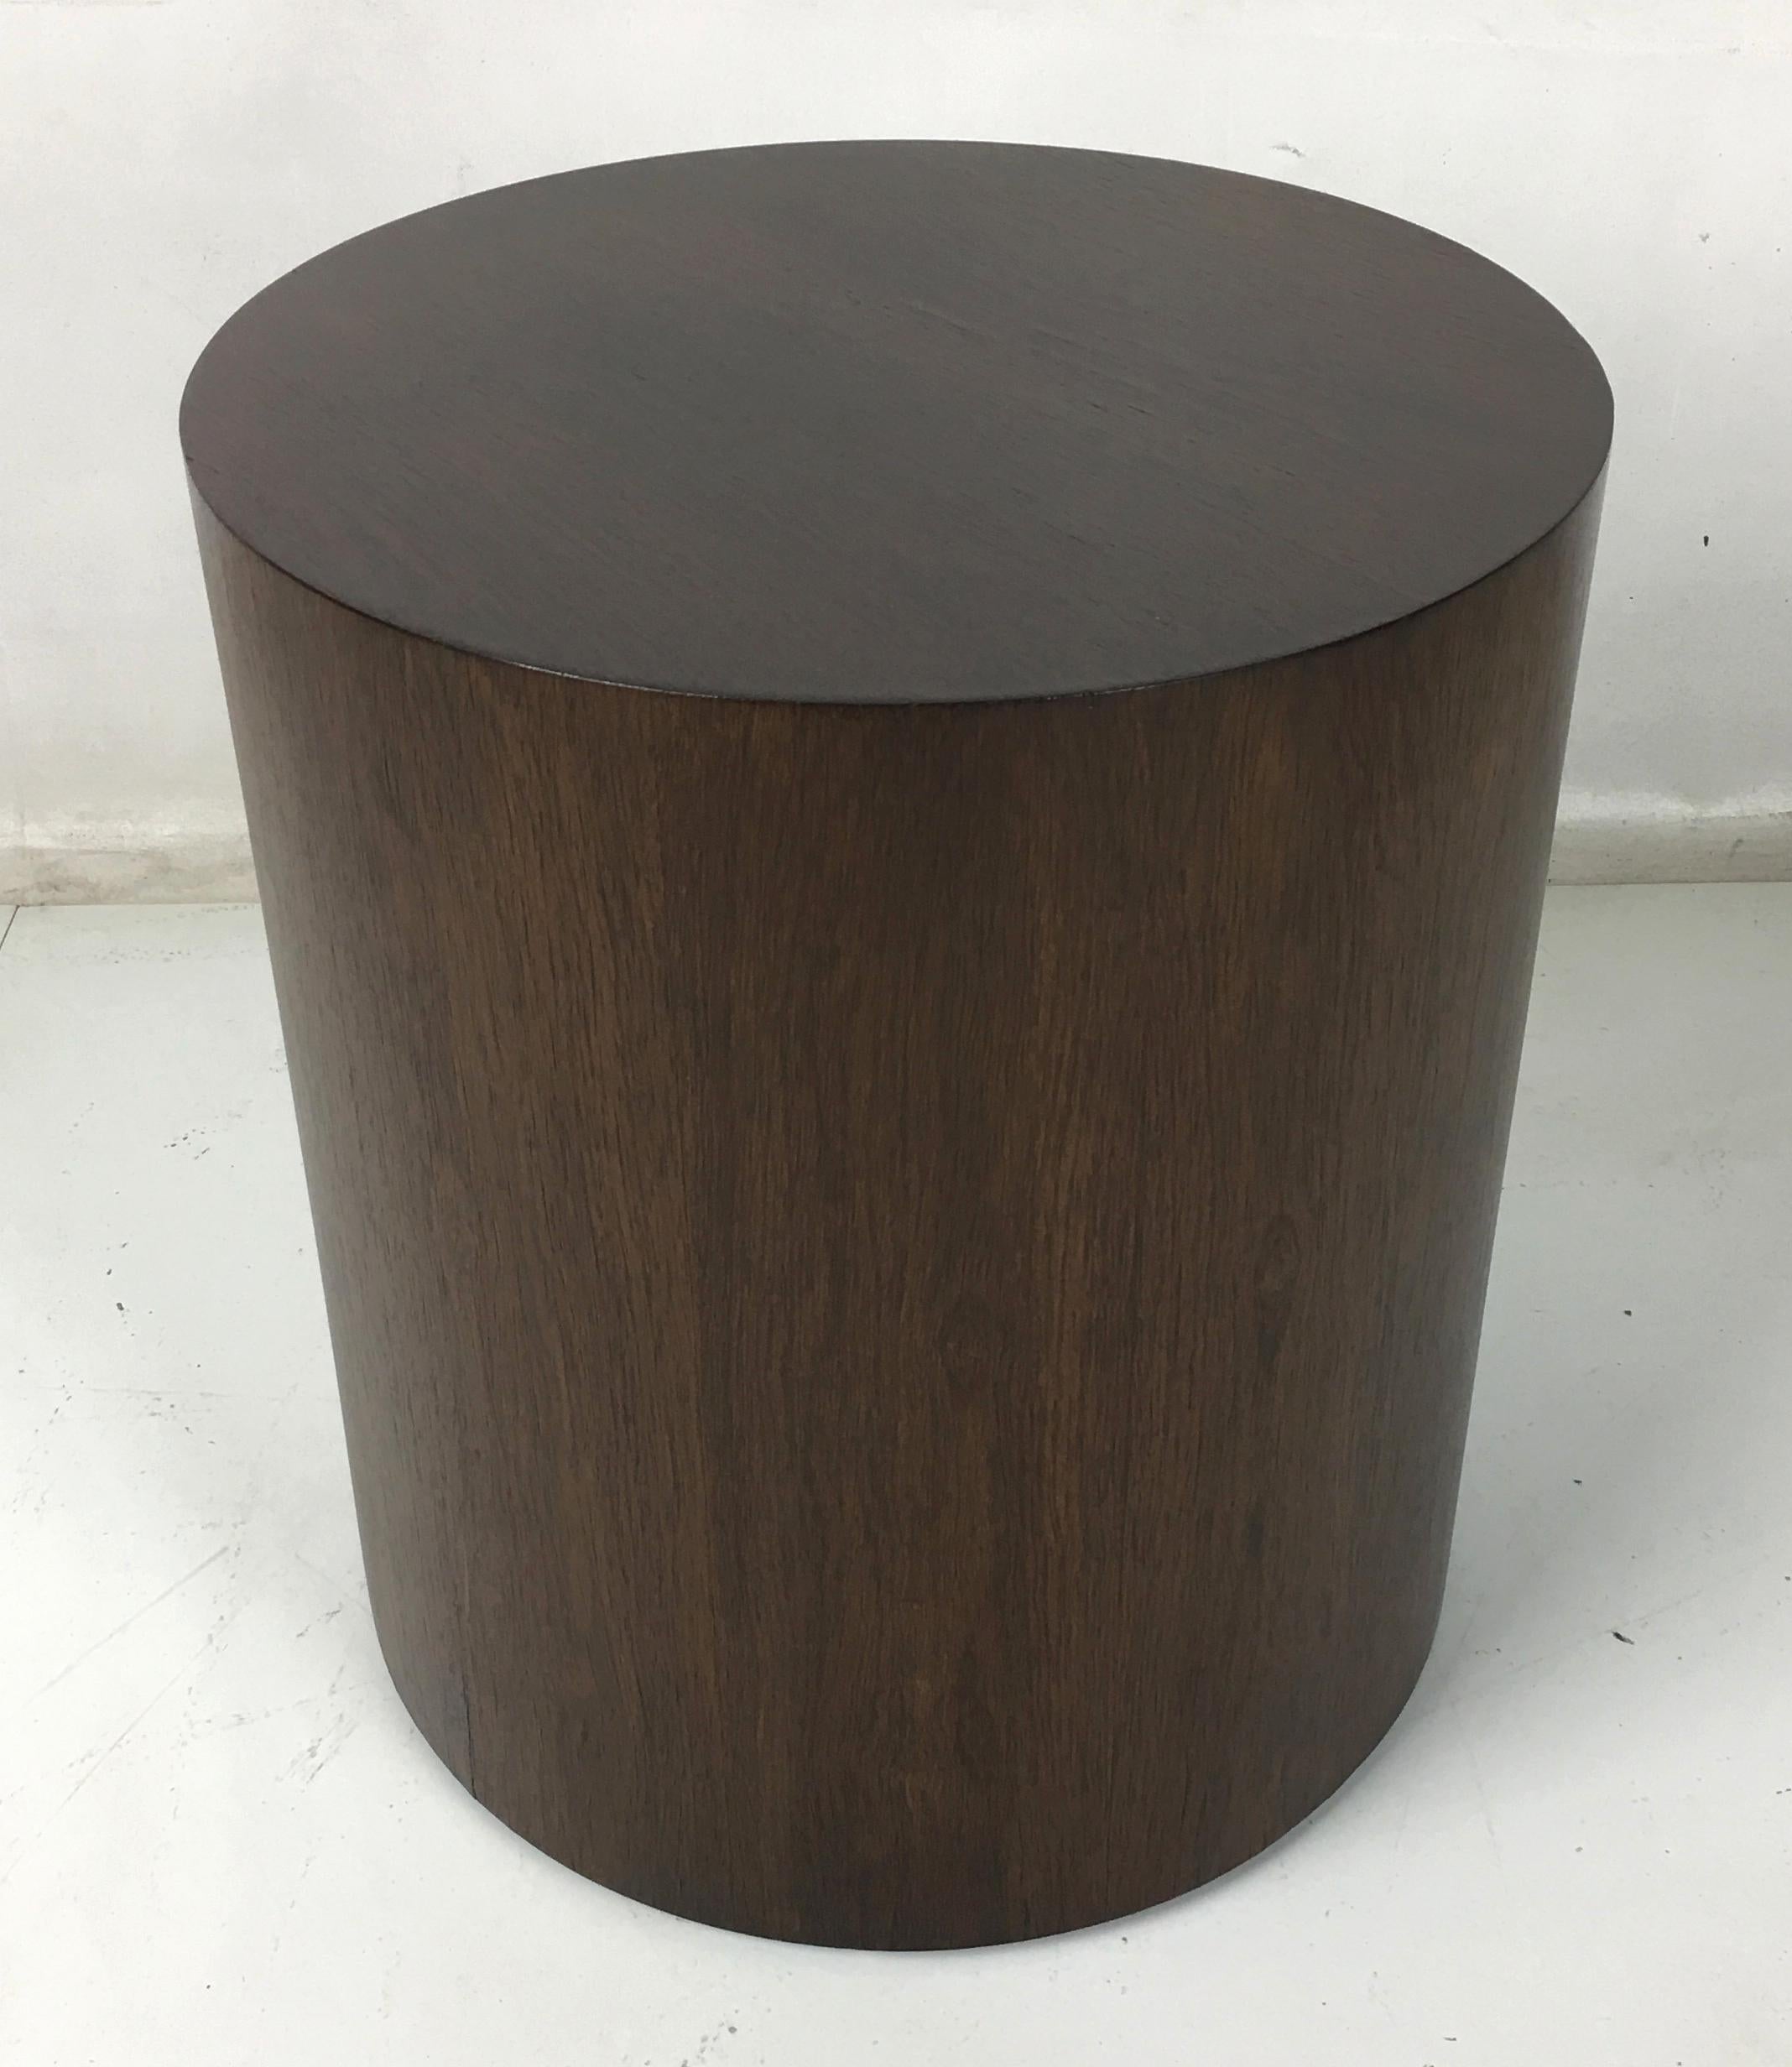 Beautifully figured rosewood veneer drum table, painstakingly refinished in dark walnut/rosewood lacquer.